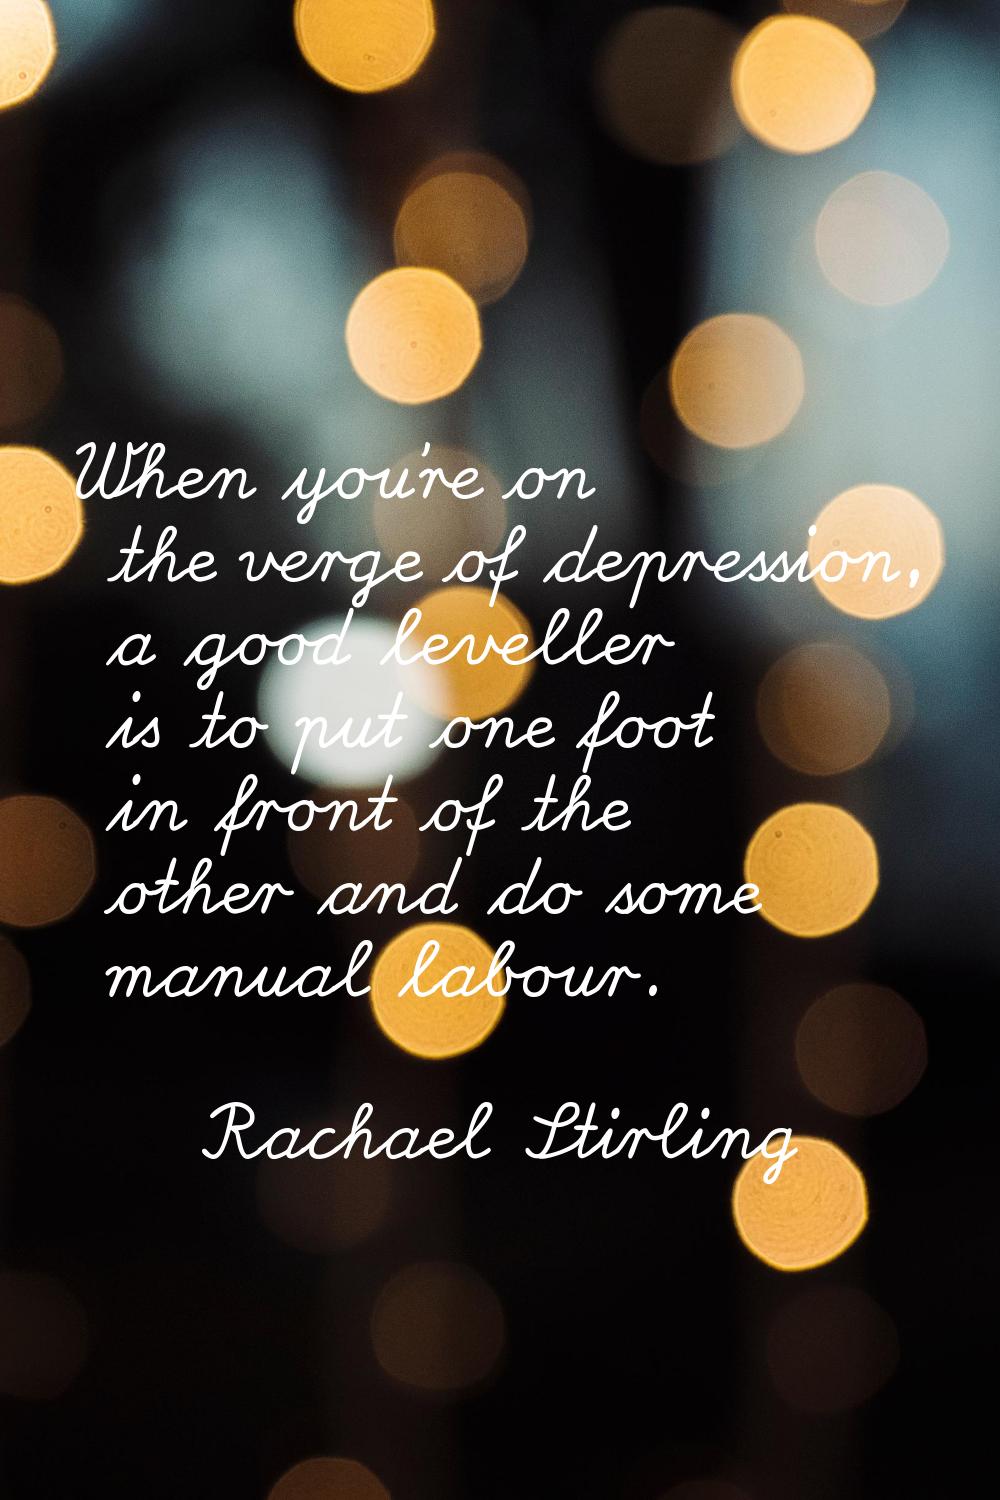 When you're on the verge of depression, a good leveller is to put one foot in front of the other an